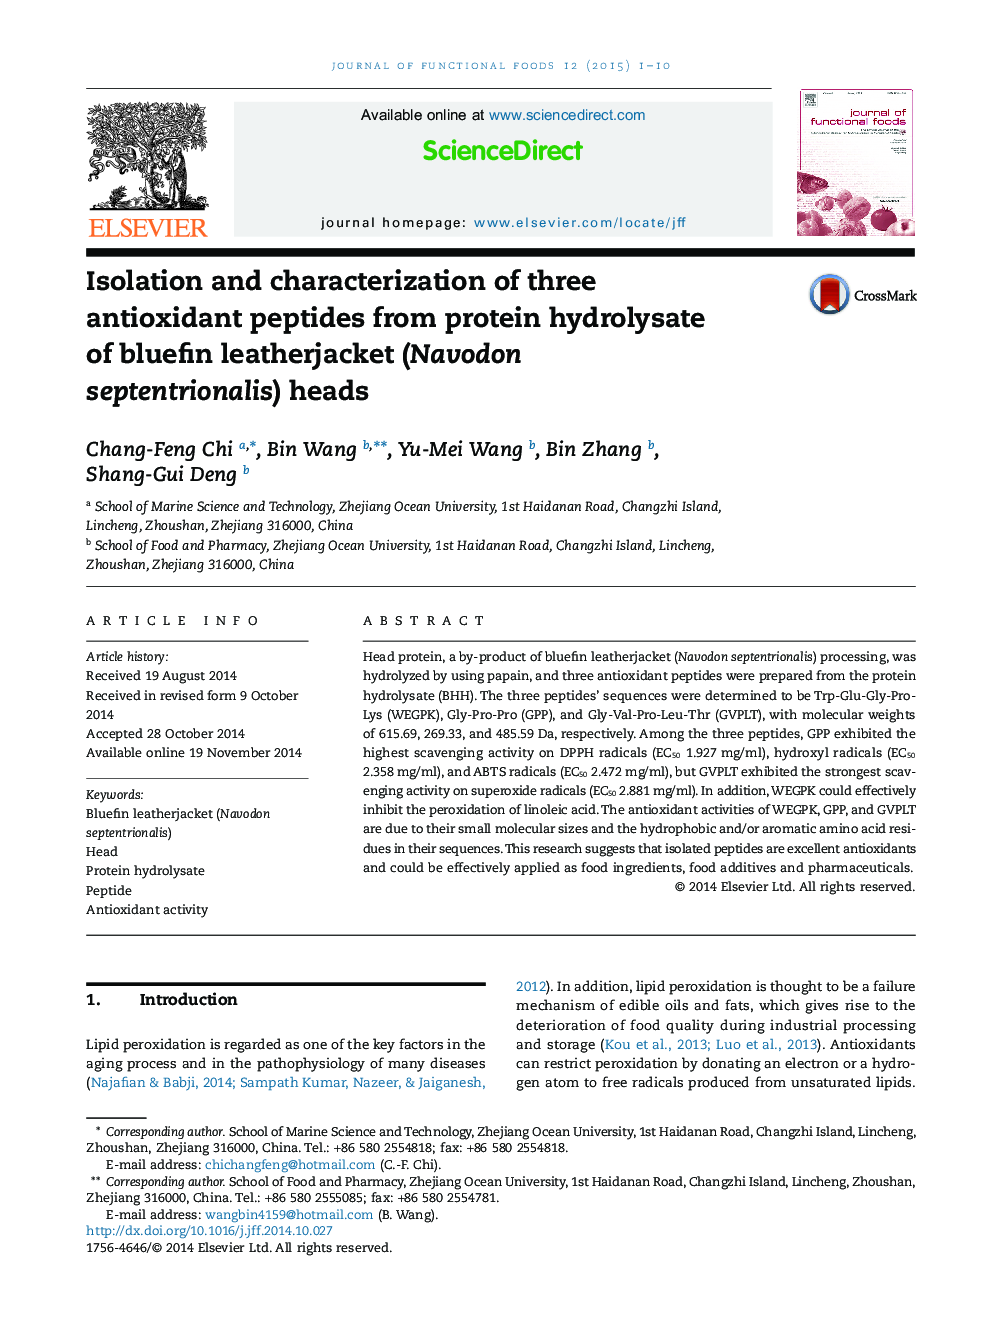 Isolation and characterization of three antioxidant peptides from protein hydrolysate of bluefin leatherjacket (Navodon septentrionalis) heads